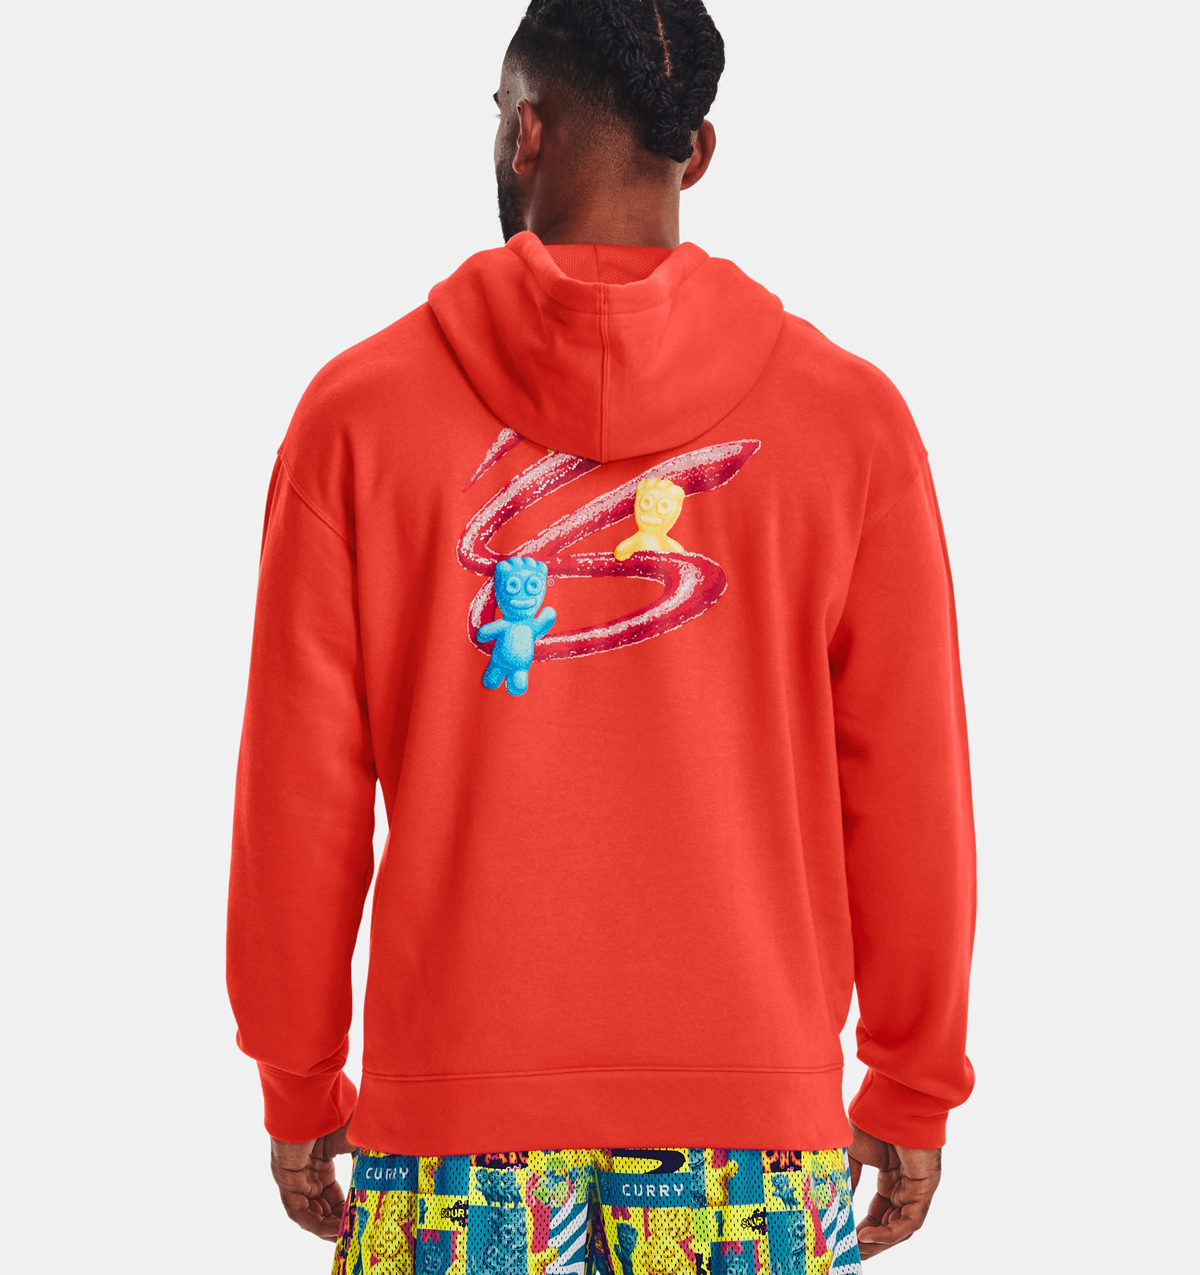 Curry-Sour-Patch-Kids-Sour-Then-Sweet-Hoodie-Red-2